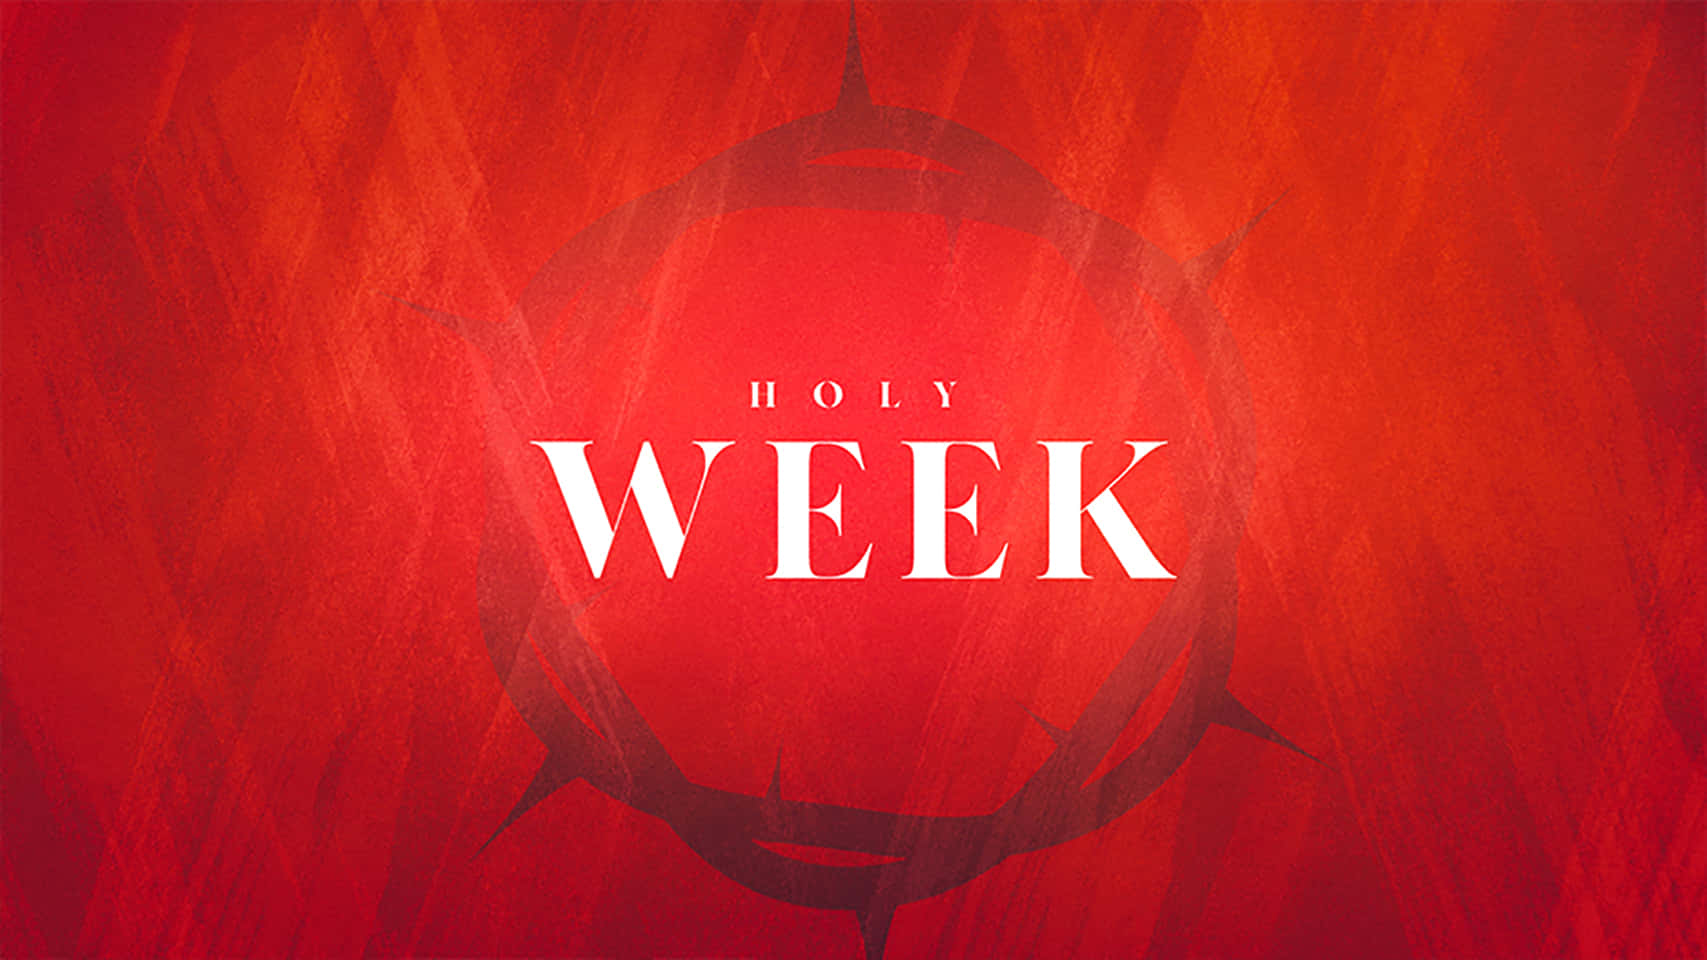 Celebrate Holy Week with friends, family and faith Wallpaper